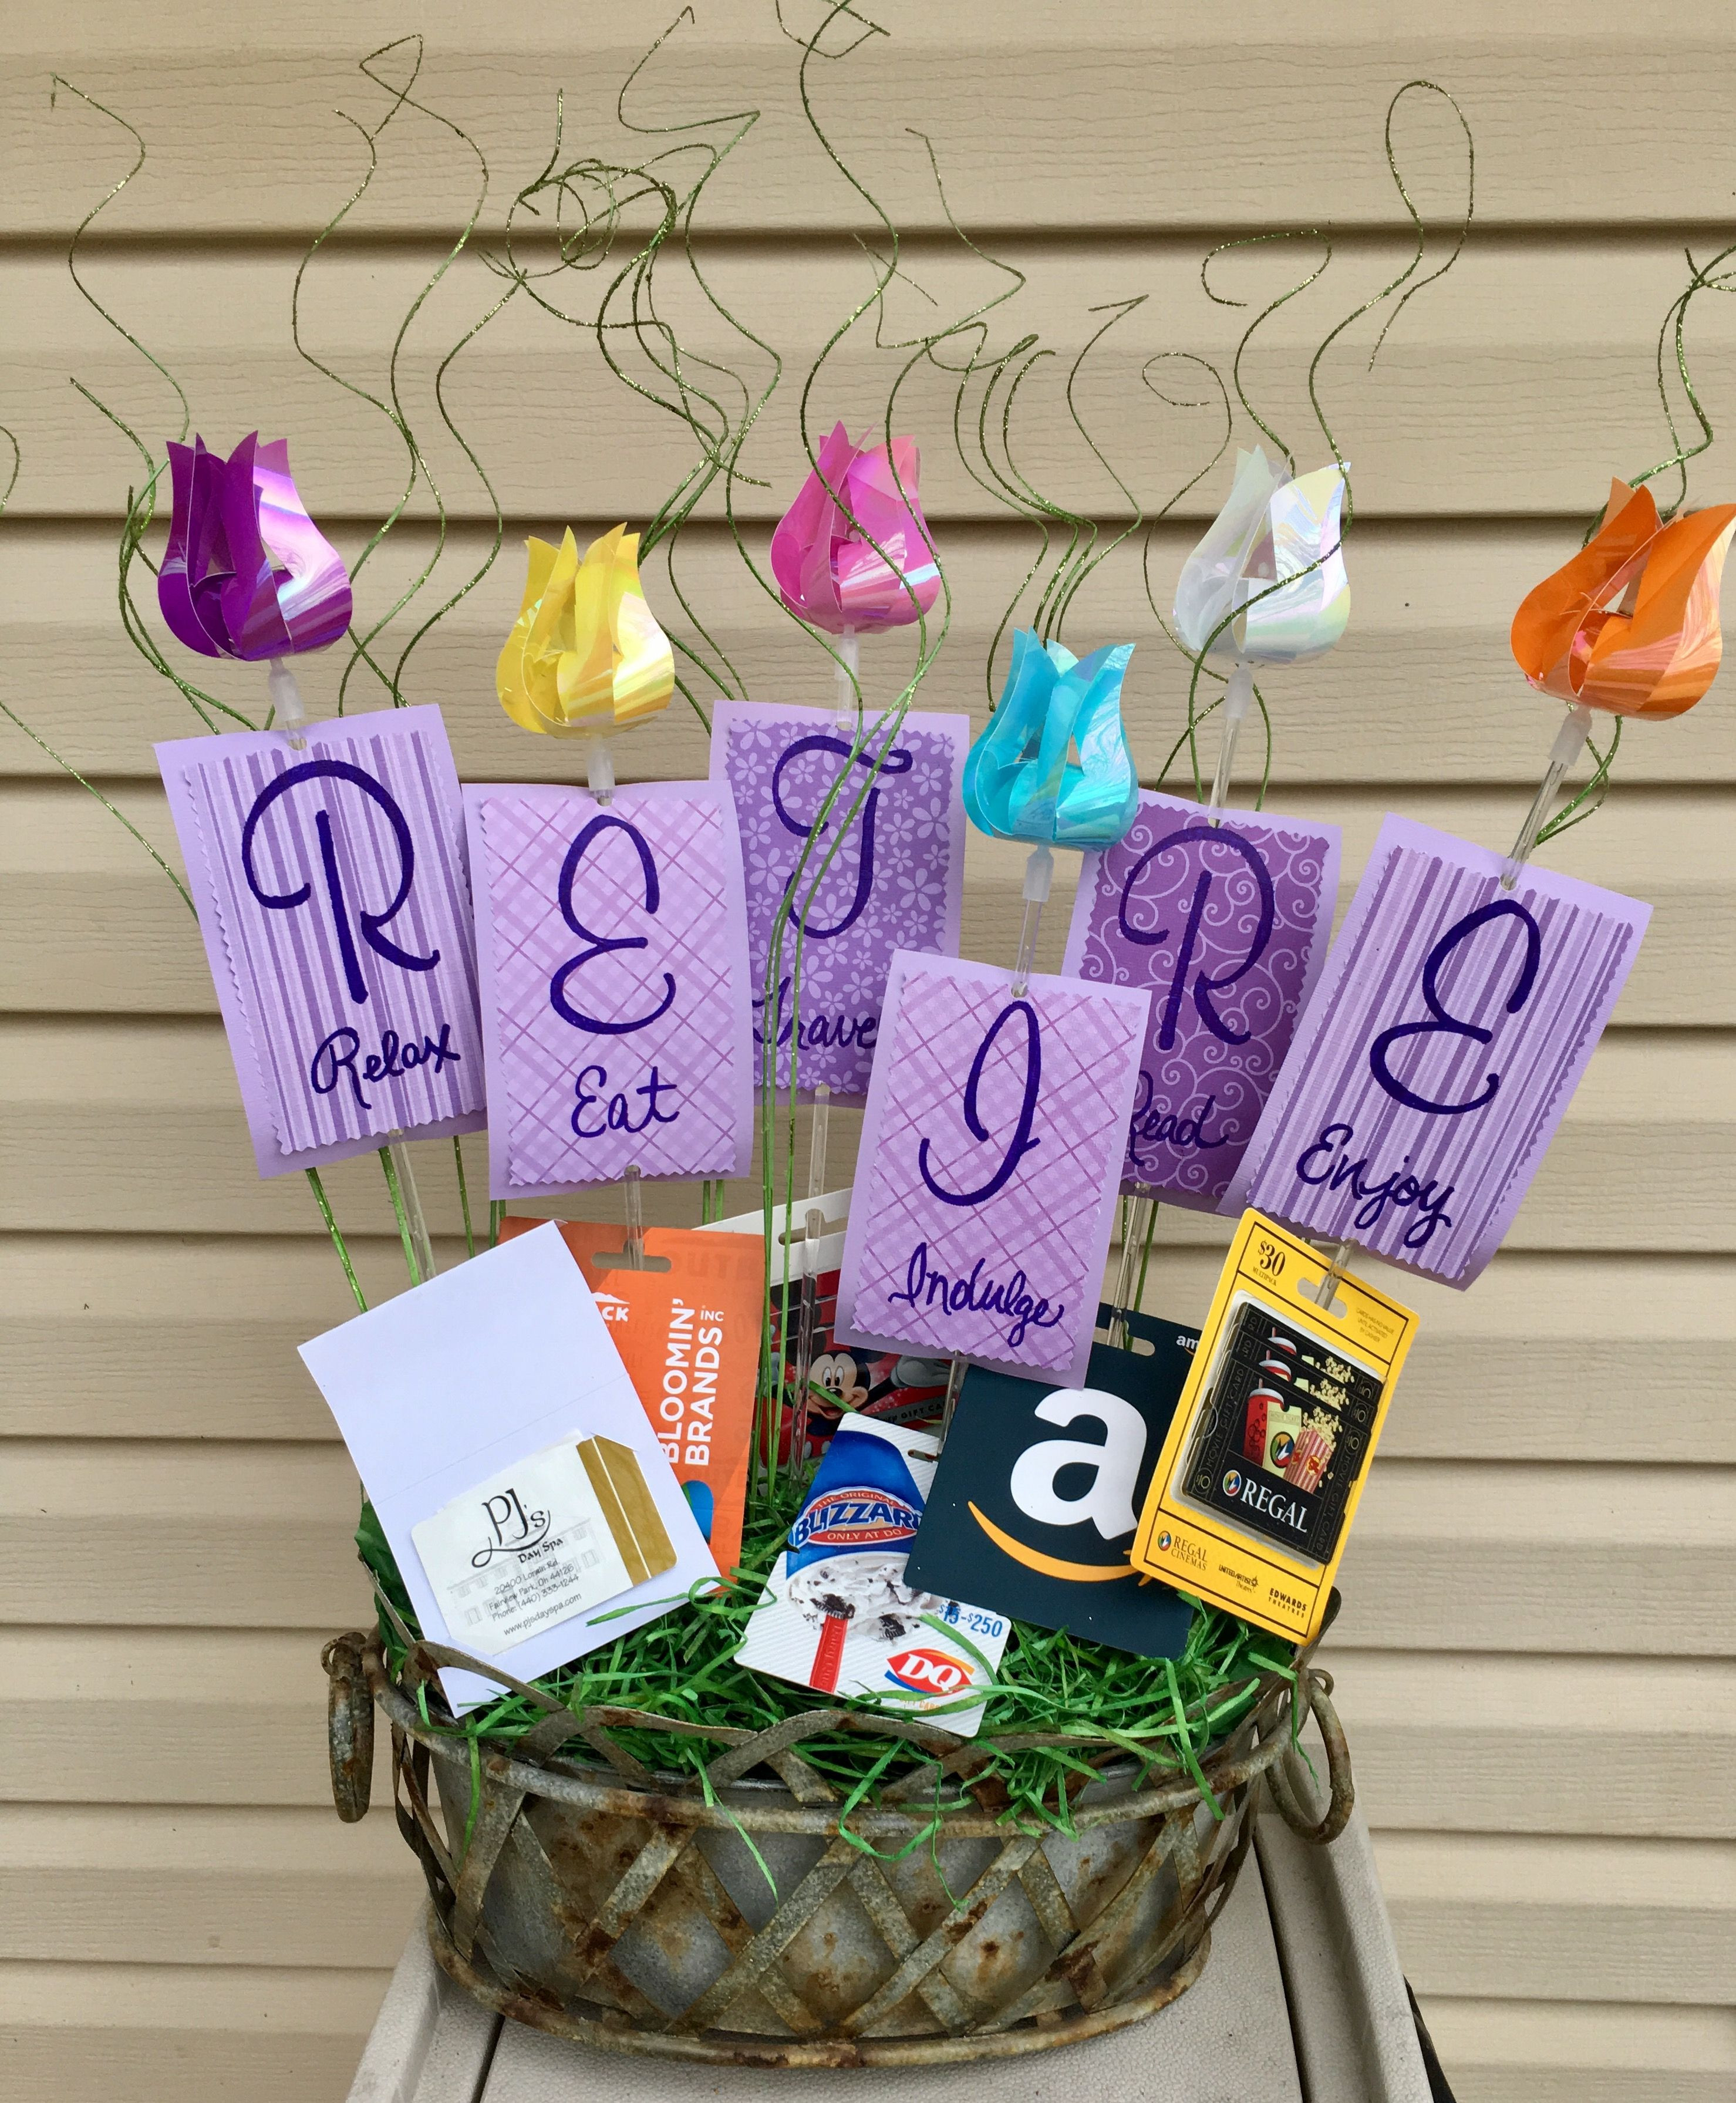 Retirement Party Gifts Ideas
 Retirement t basket with t cards Relax Eat Travel